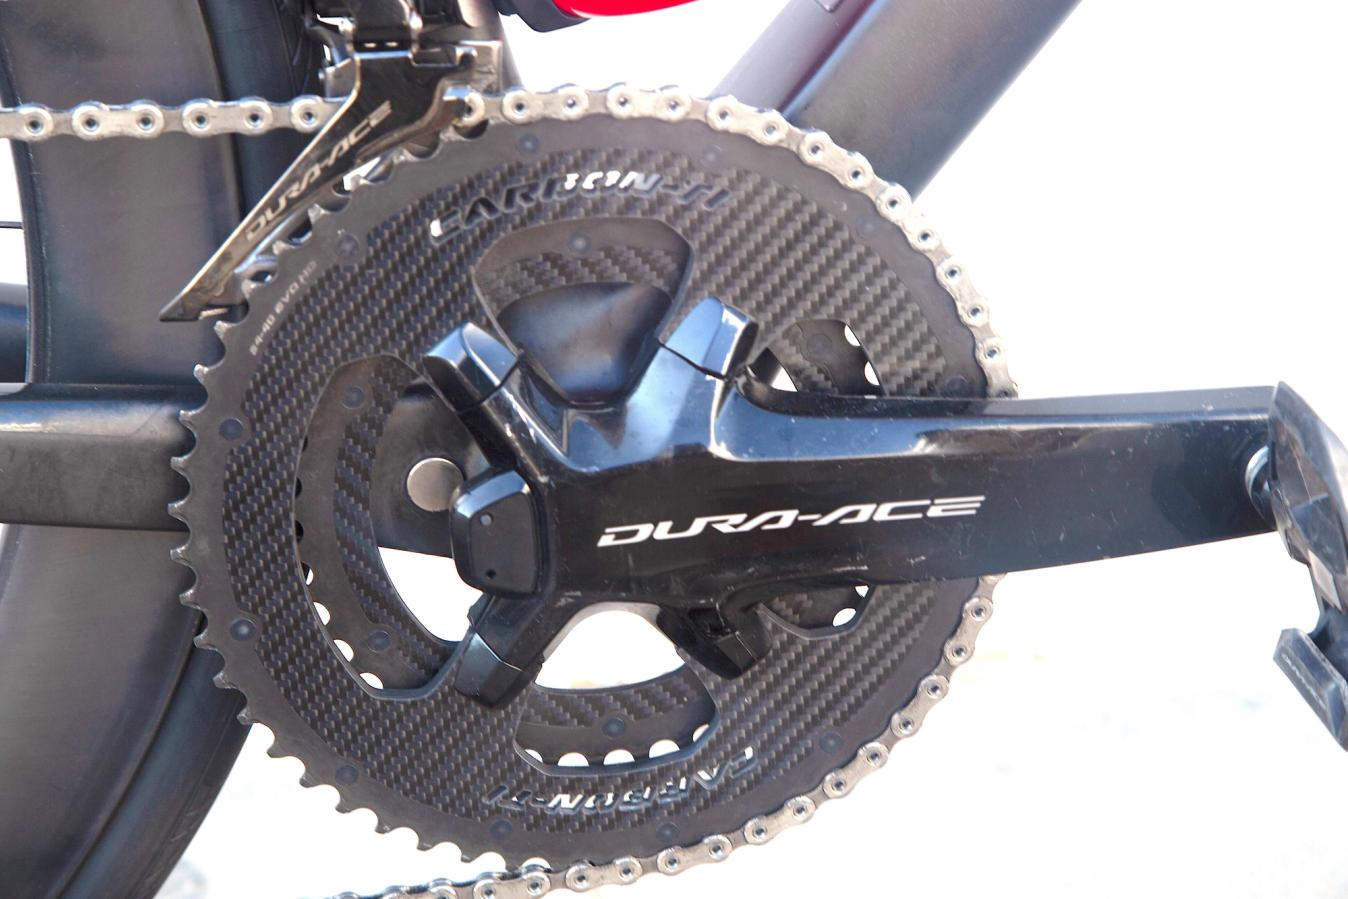 The Carbon-Ti chainrings cut weight